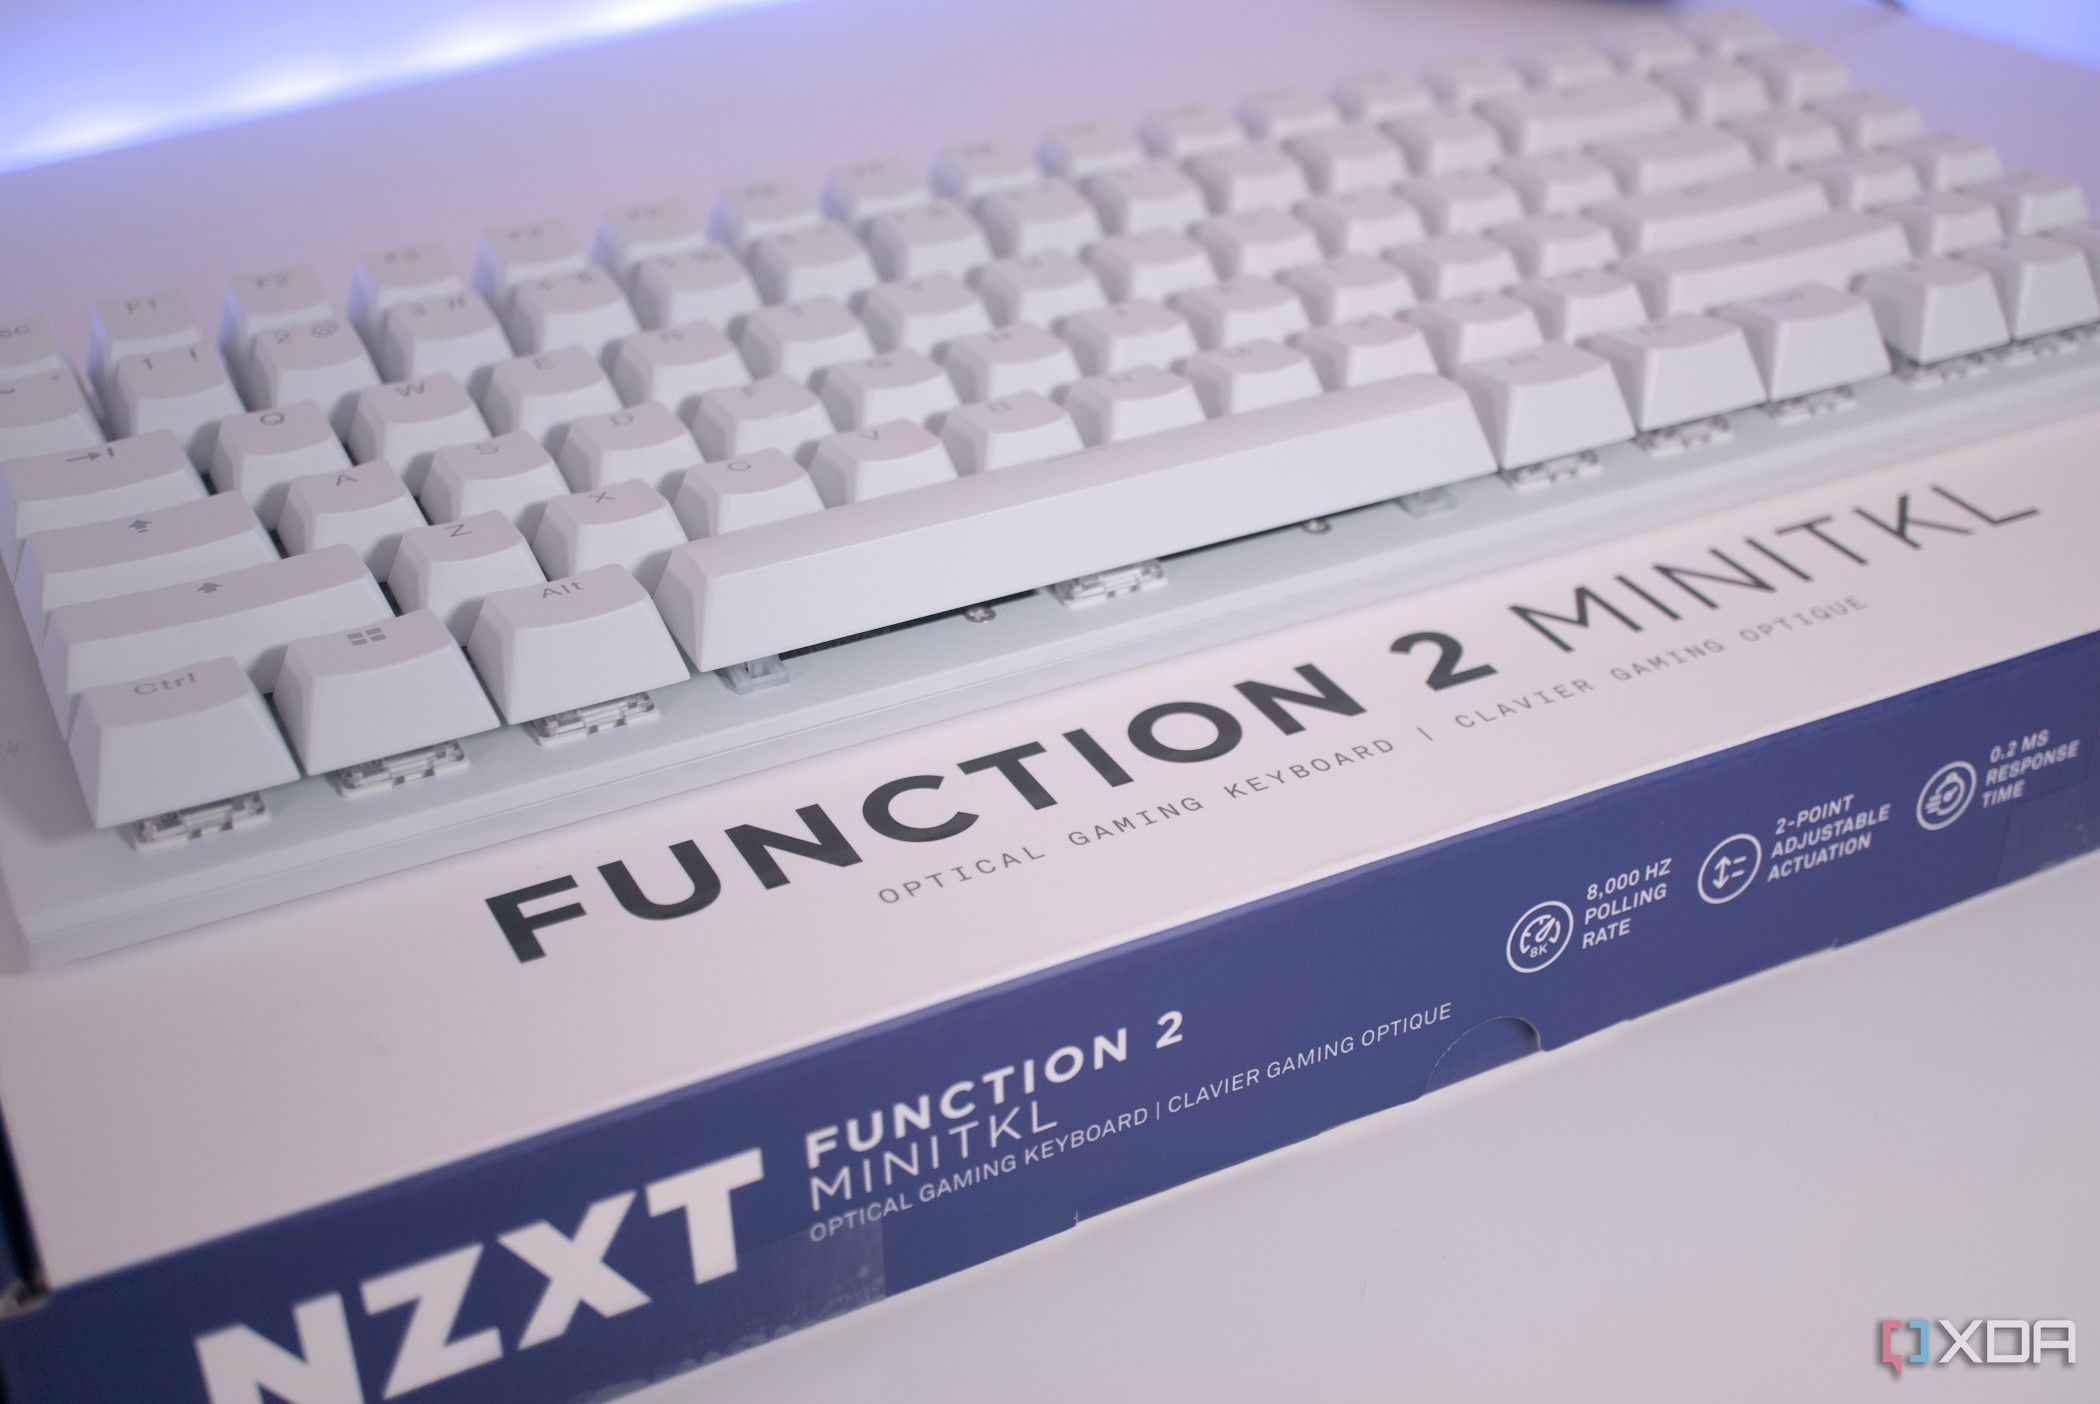 NZXT Function 2 on its box